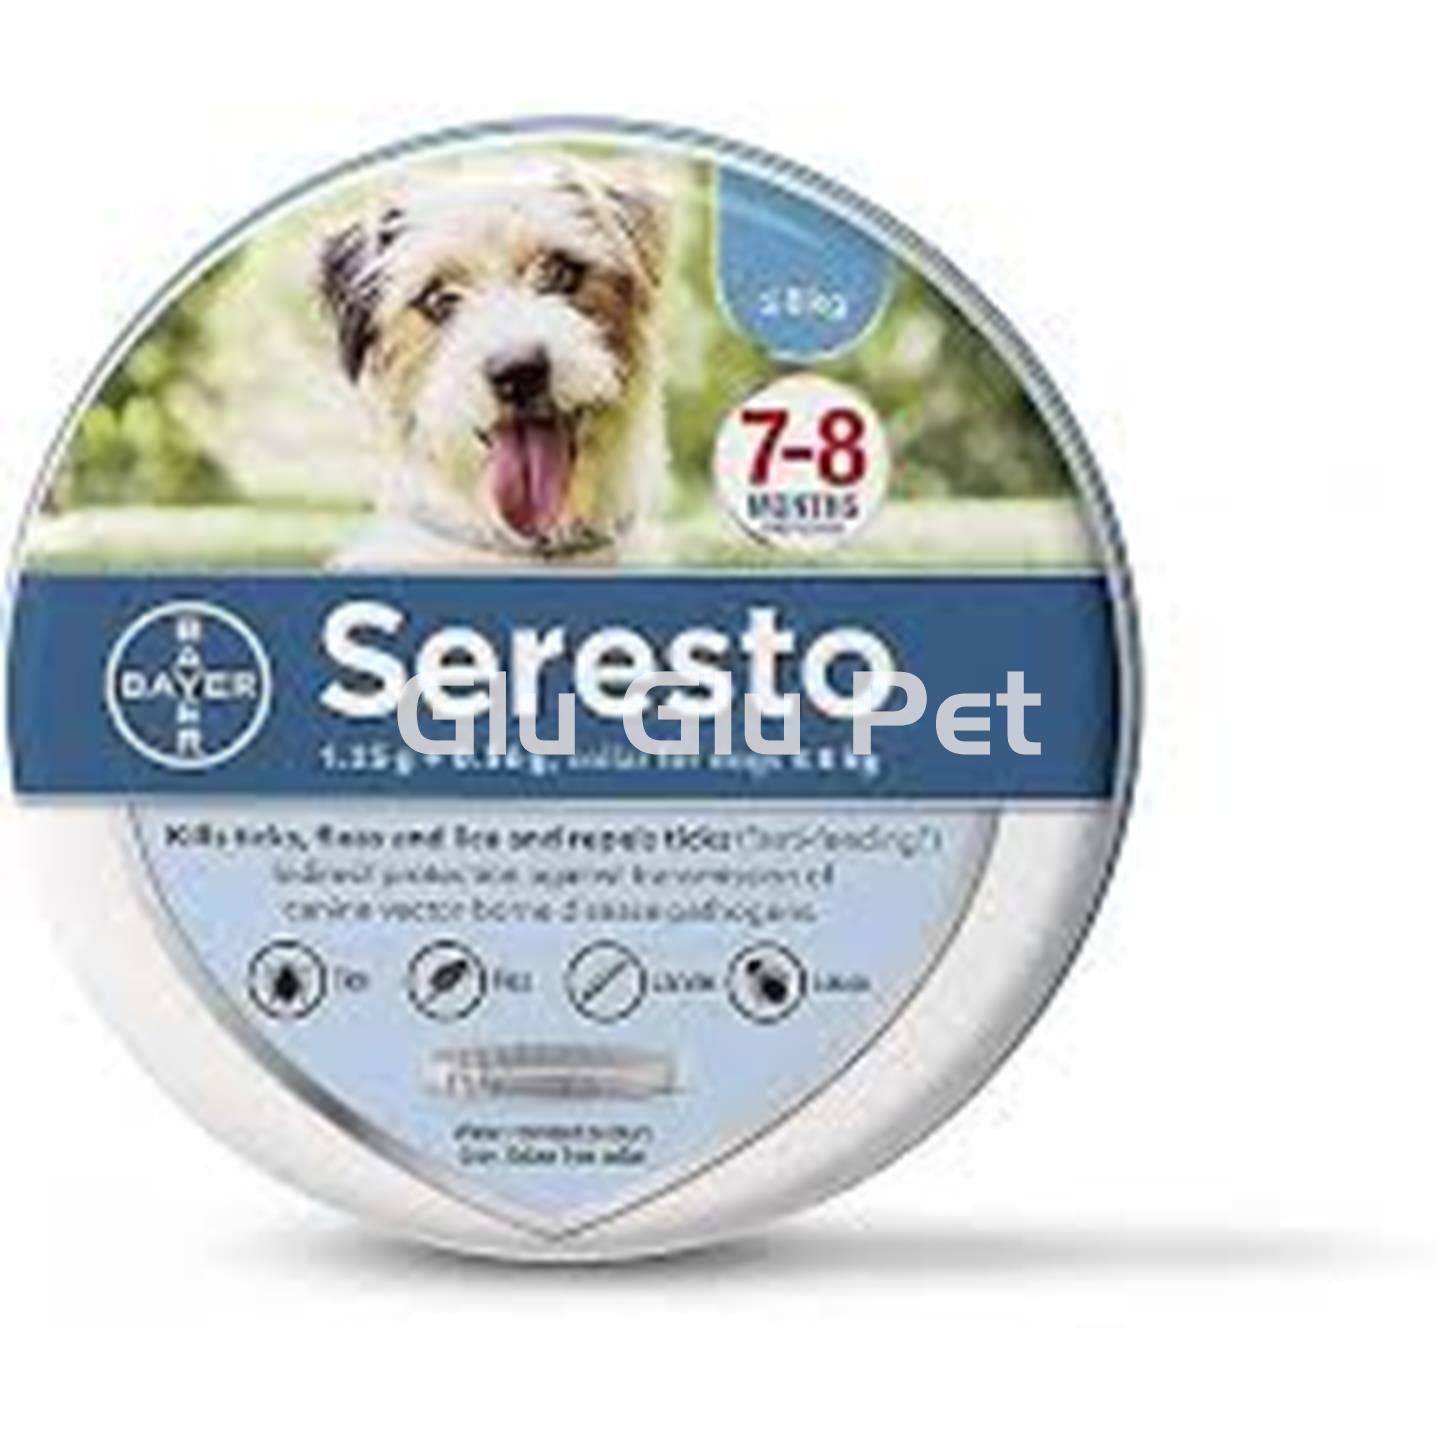 Seresto antiparasitic collar for dogs up to 8 kg - Image 1